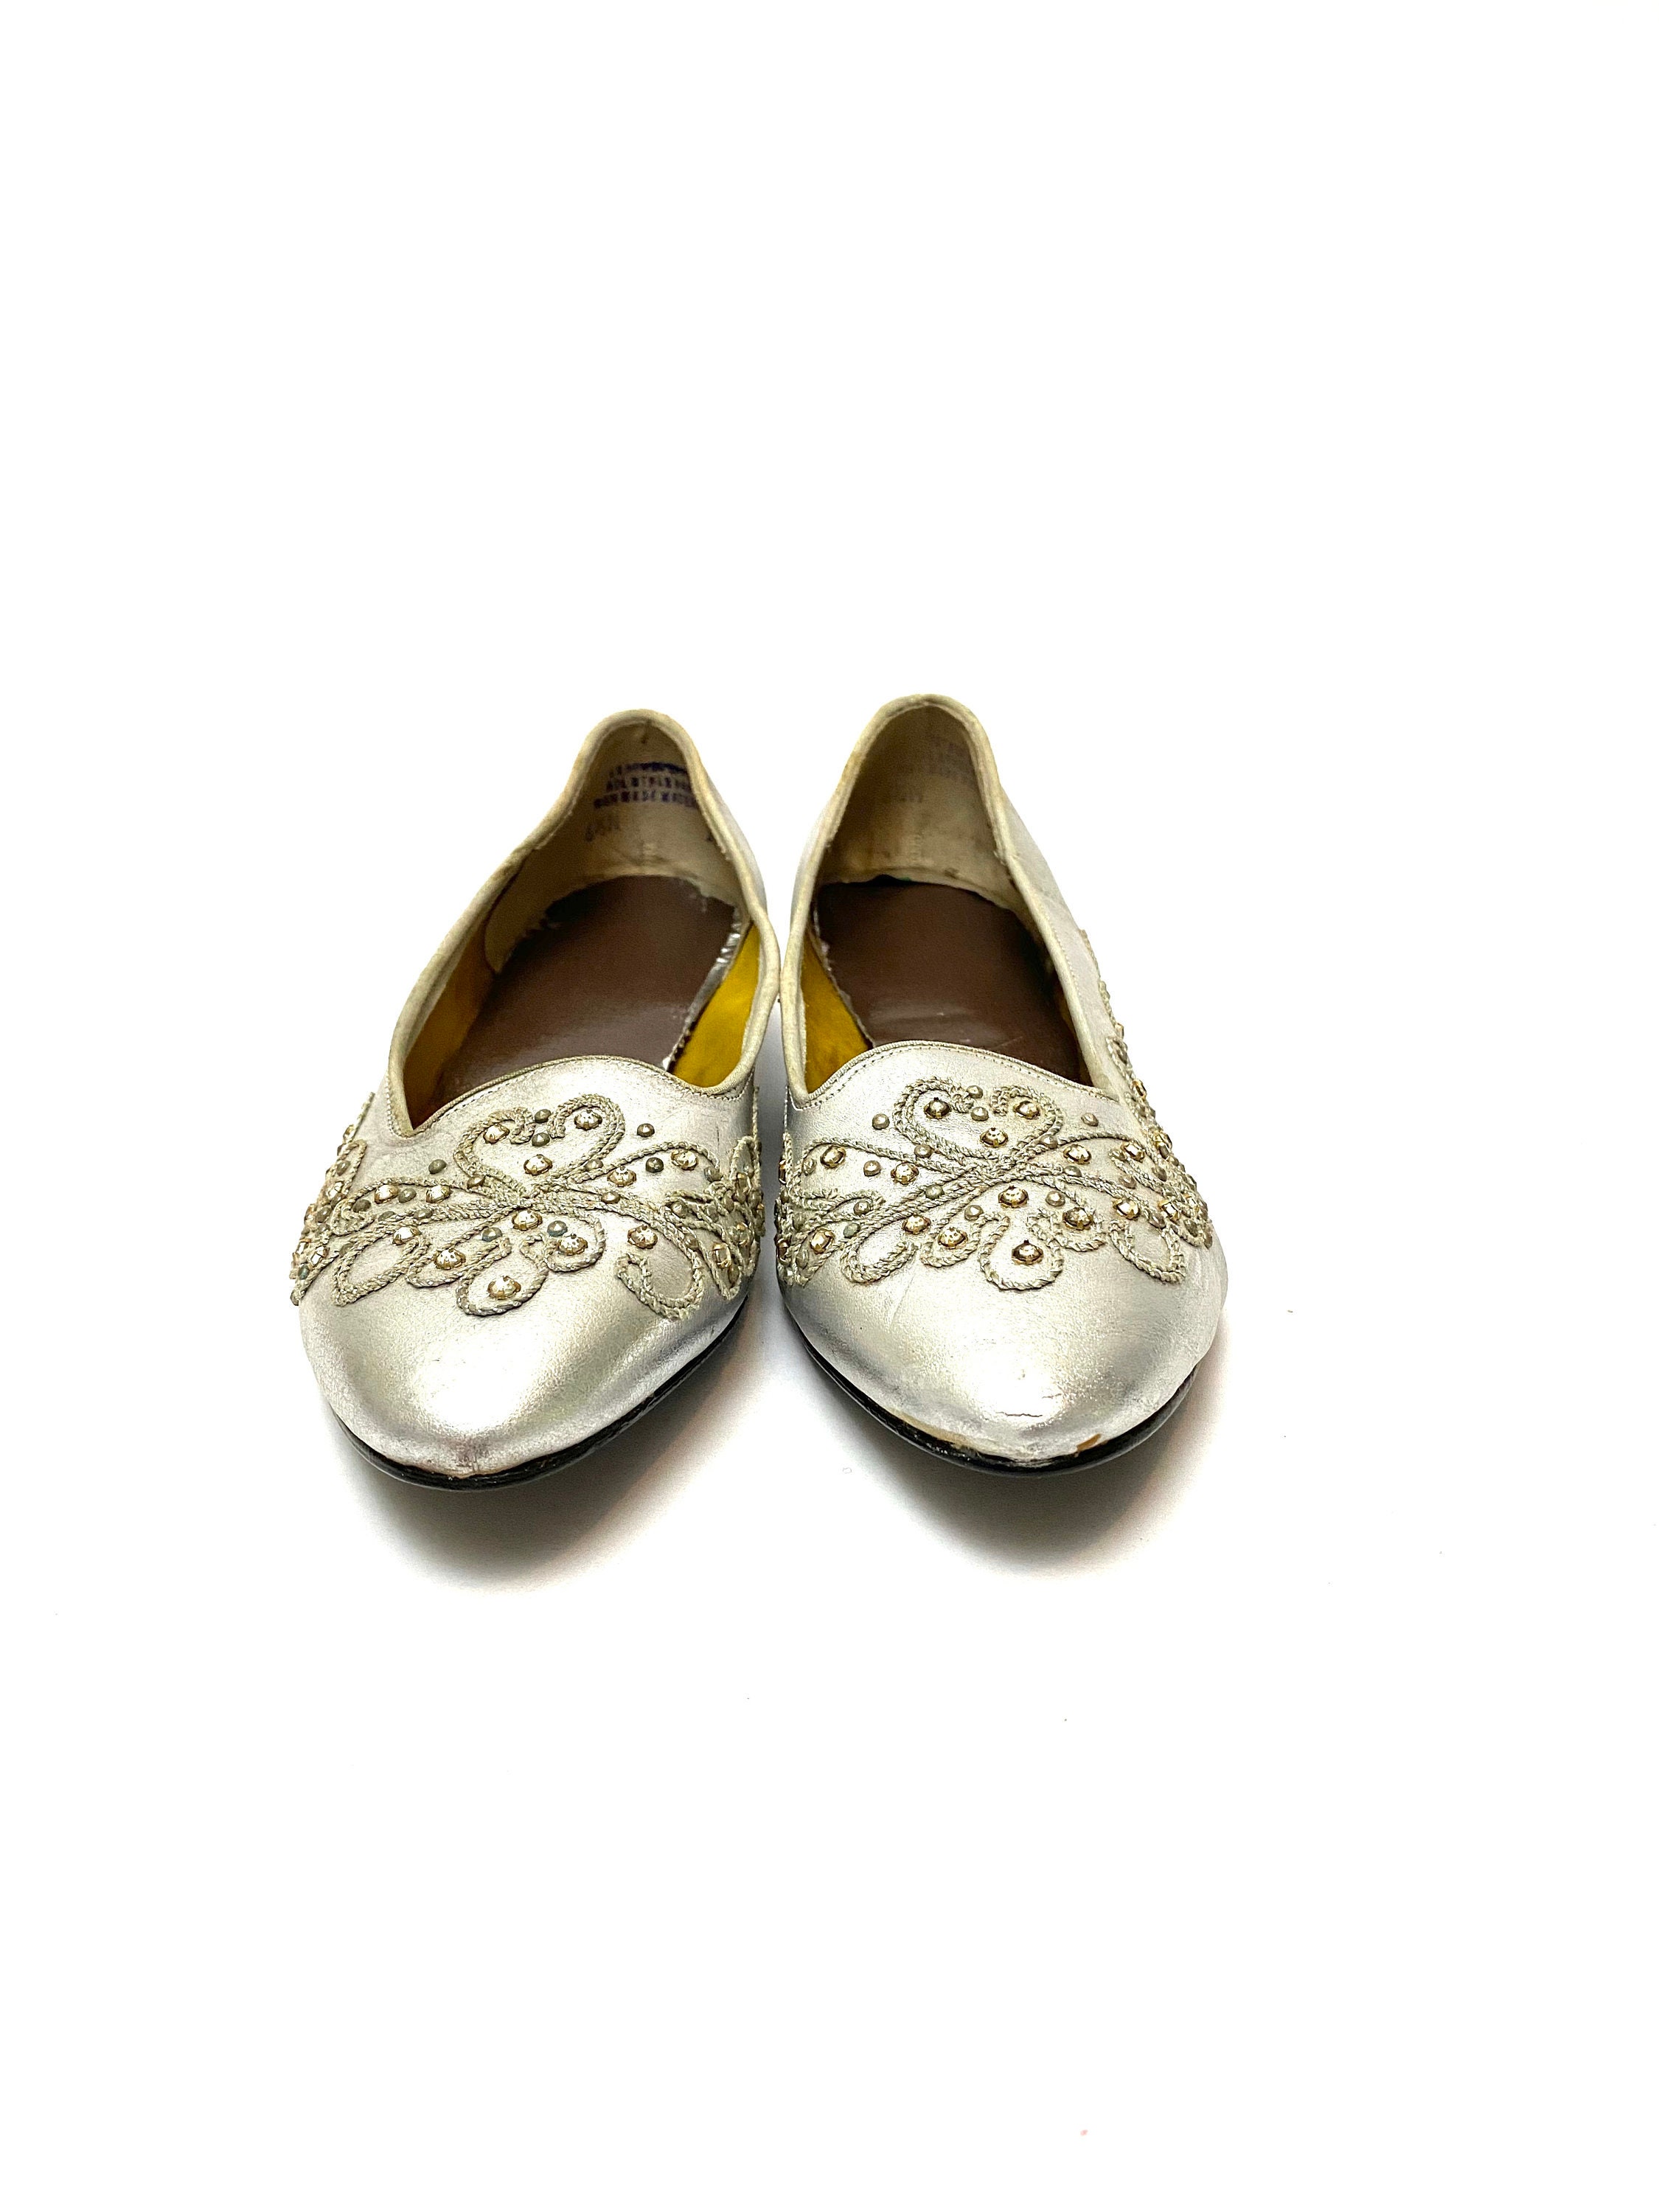 Vintage 1960s Metallic Silver Flats // Leather and Rhinestone - Etsy